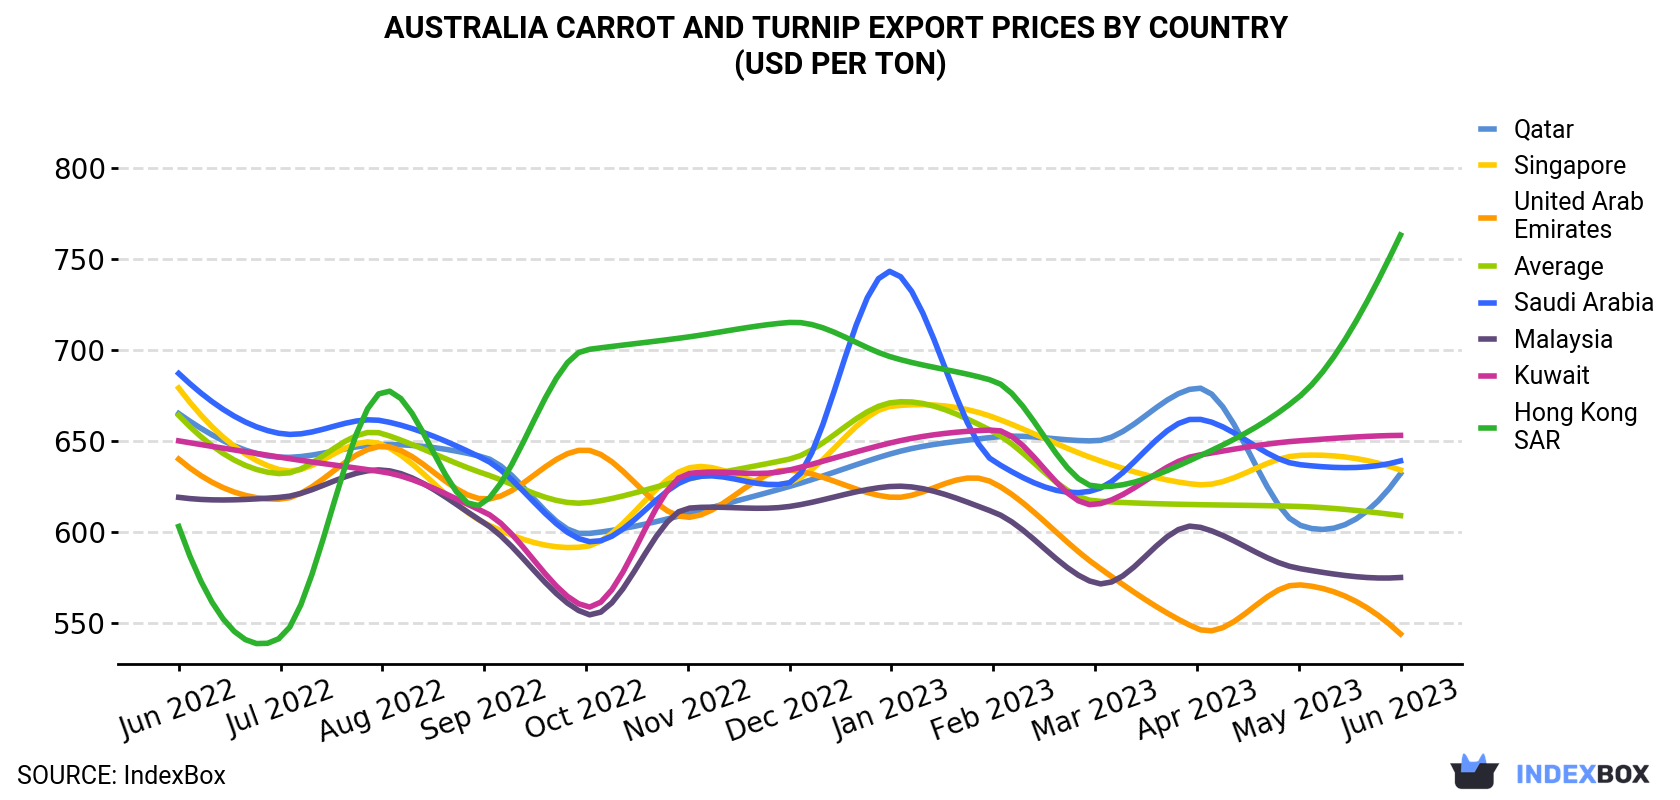 Australia Carrot And Turnip Export Prices By Country (USD Per Ton)